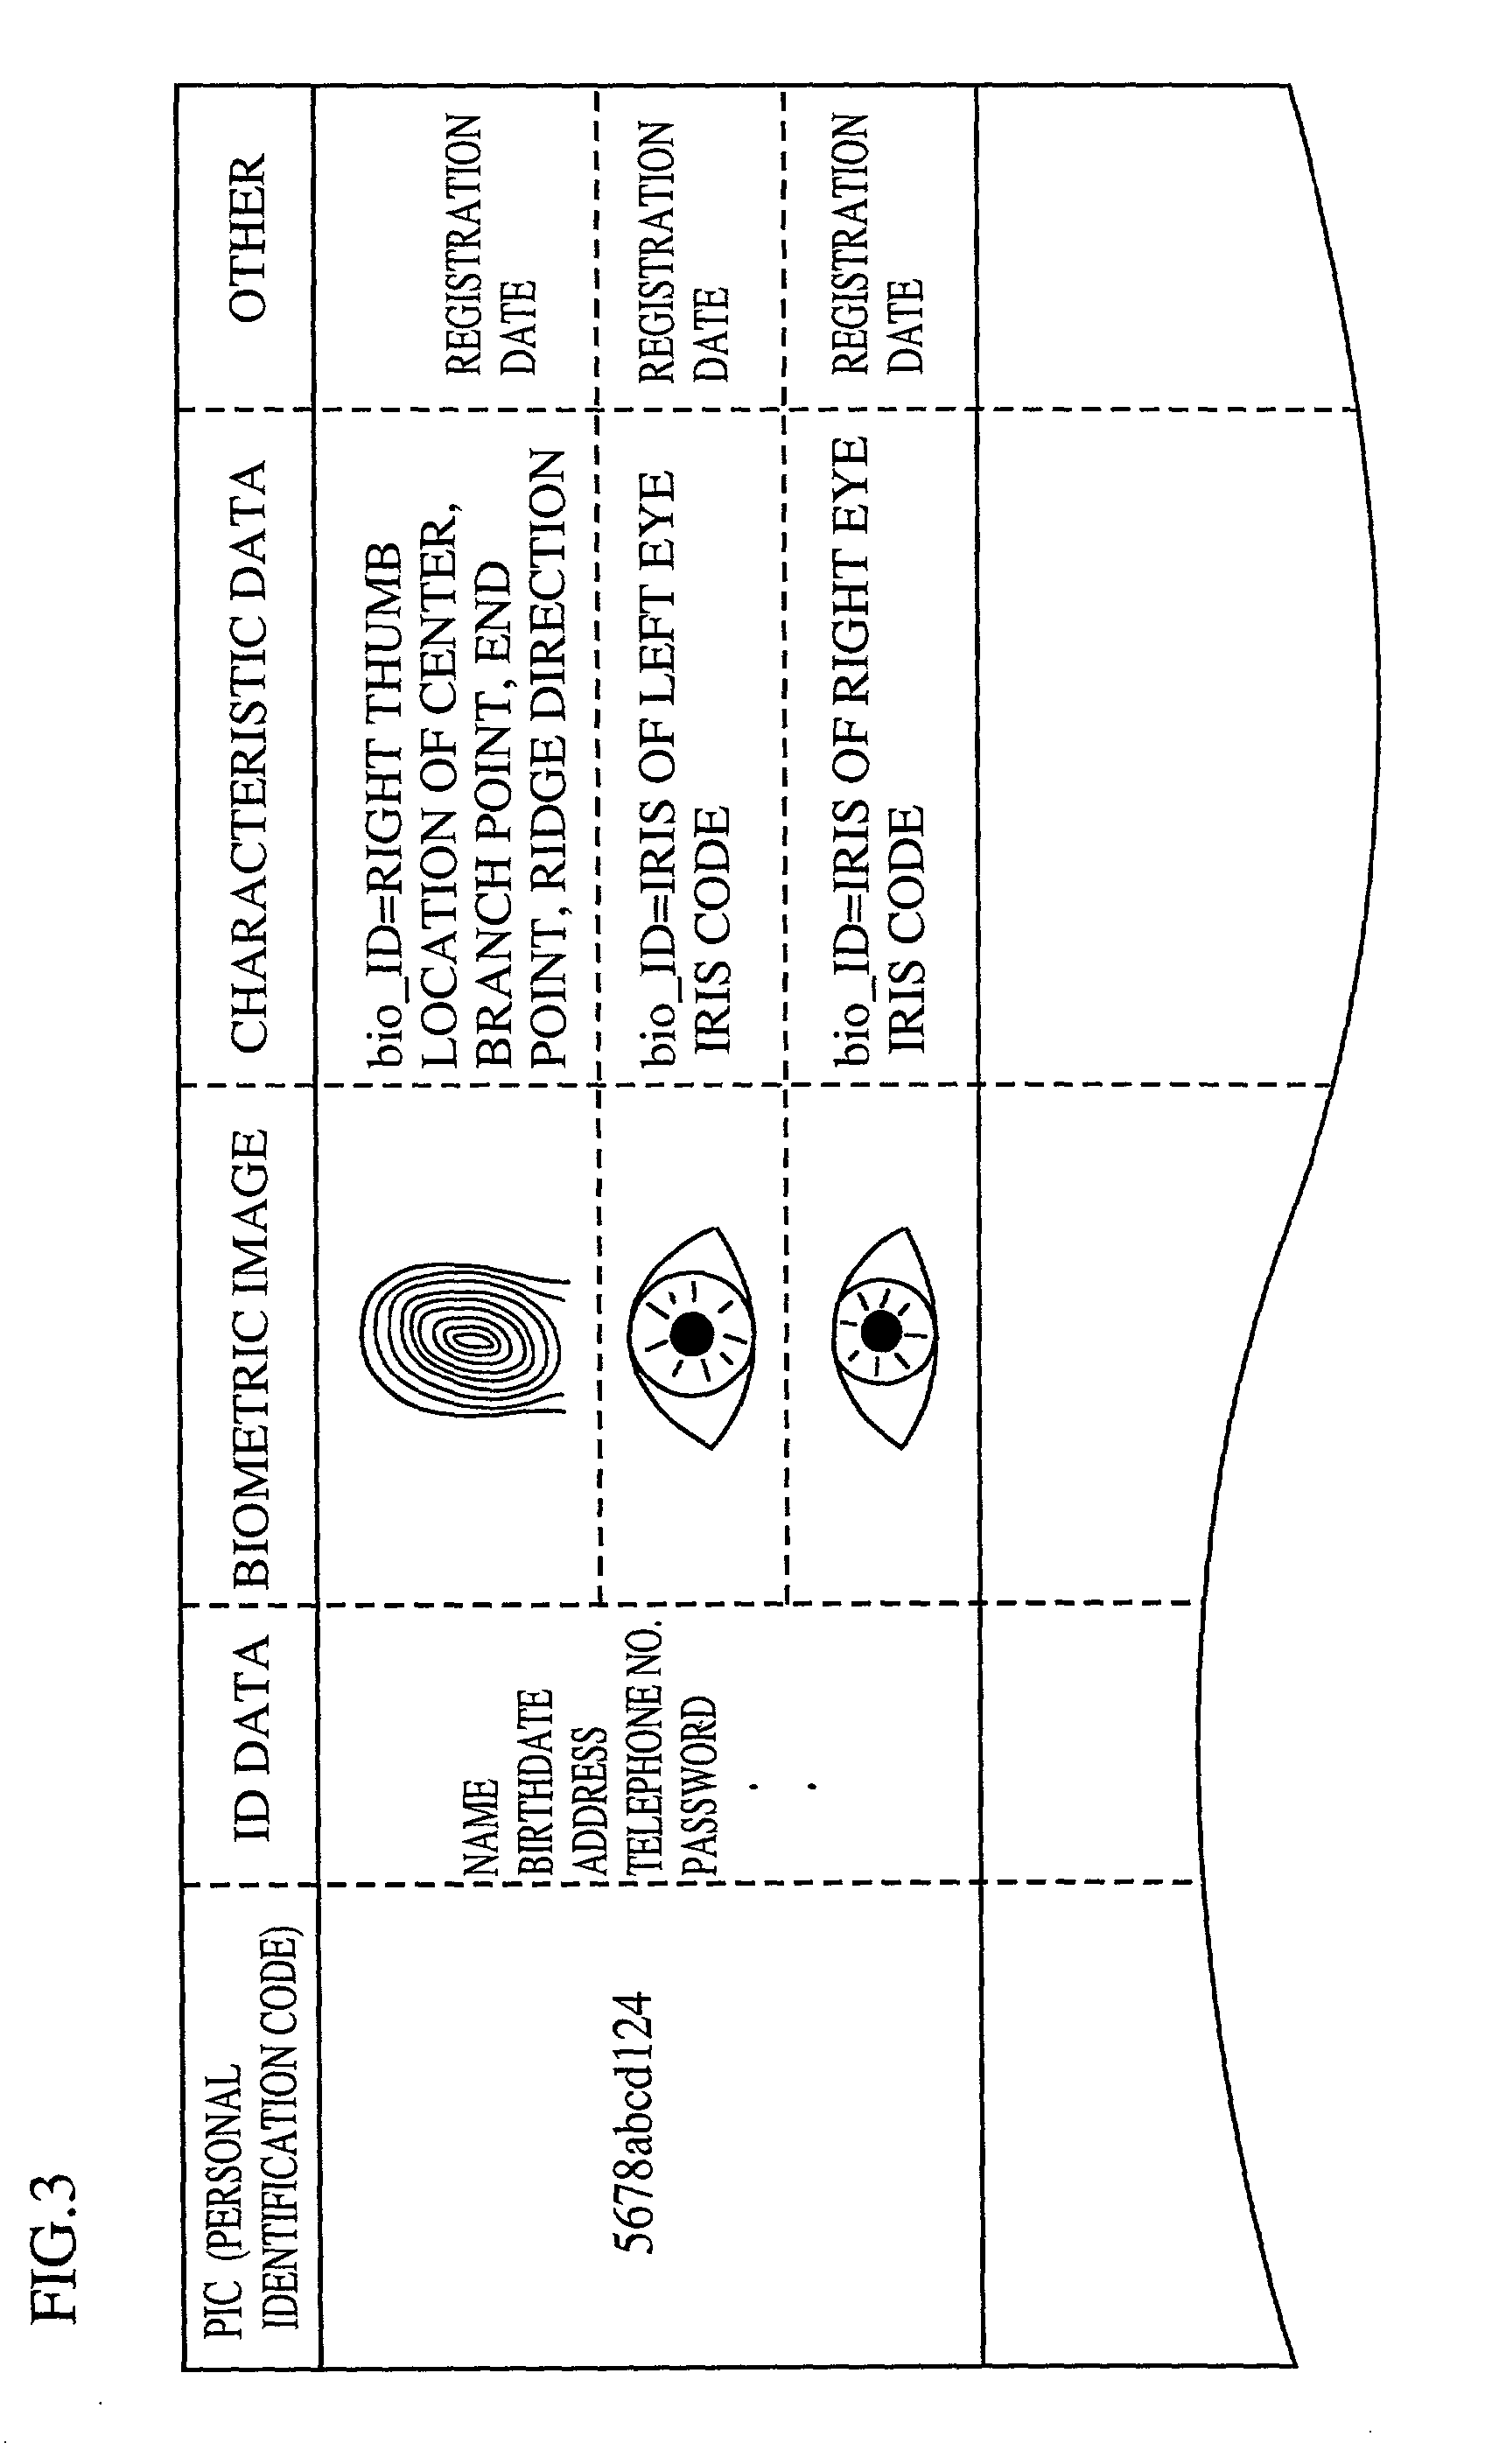 Apparatus for identity verification, a system for identity verification, a card for identity verification and a method for identity verification, based on identification by biometrics